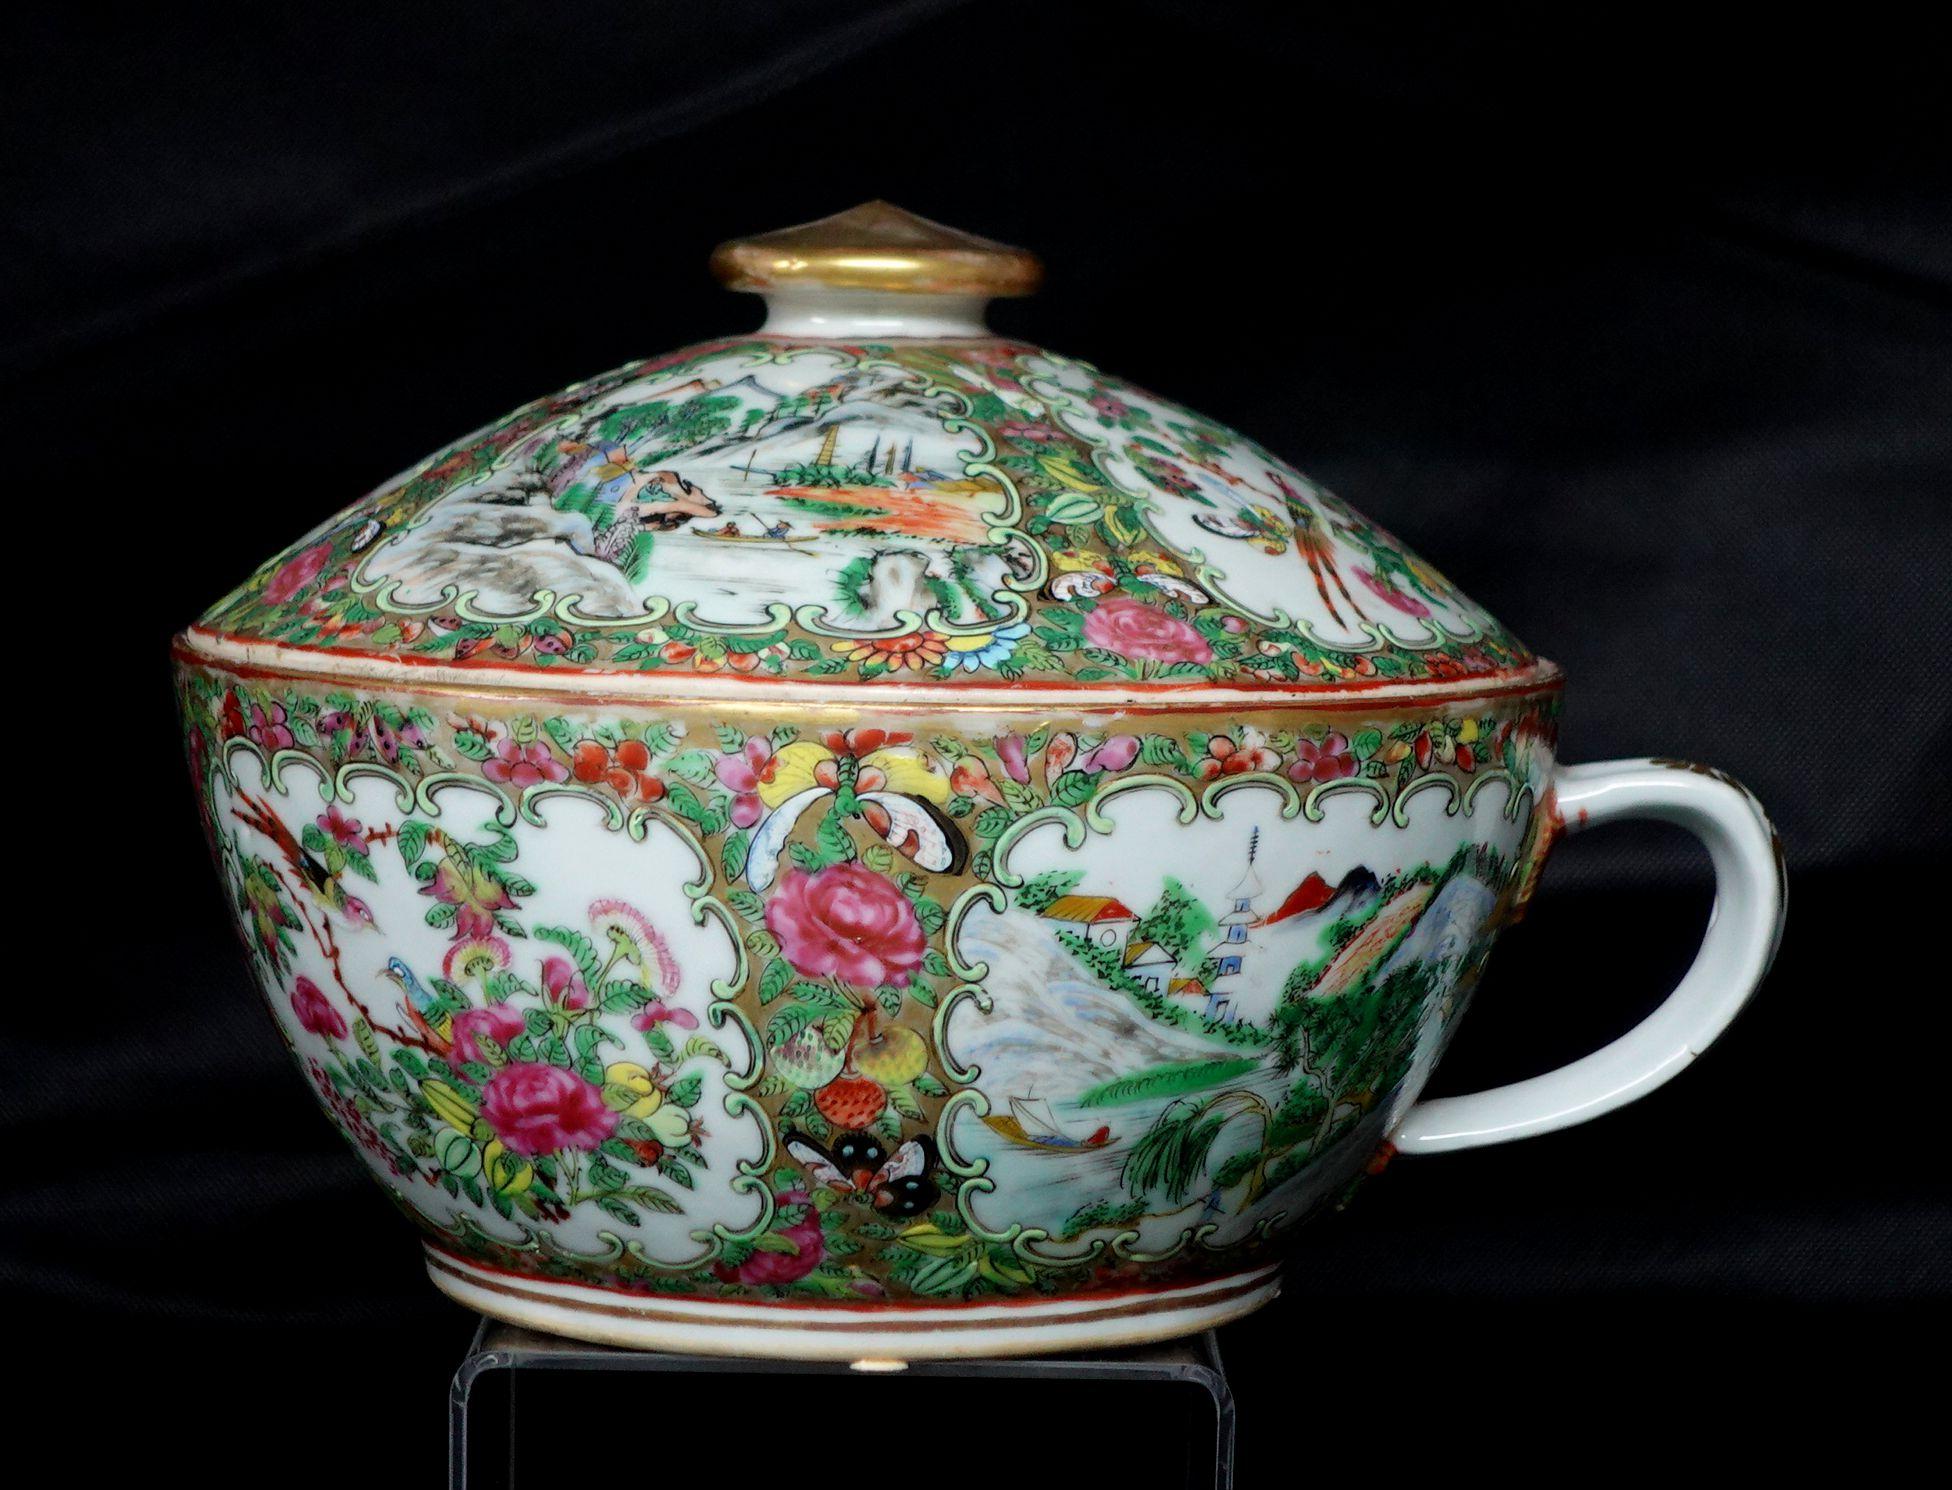 Rare early Canton Chinese Export porcelain Rose Medallion bowl with lid, depicting florals, birds, and landscaping throughout the bowl and lid, very unique, rare and beautiful.
 